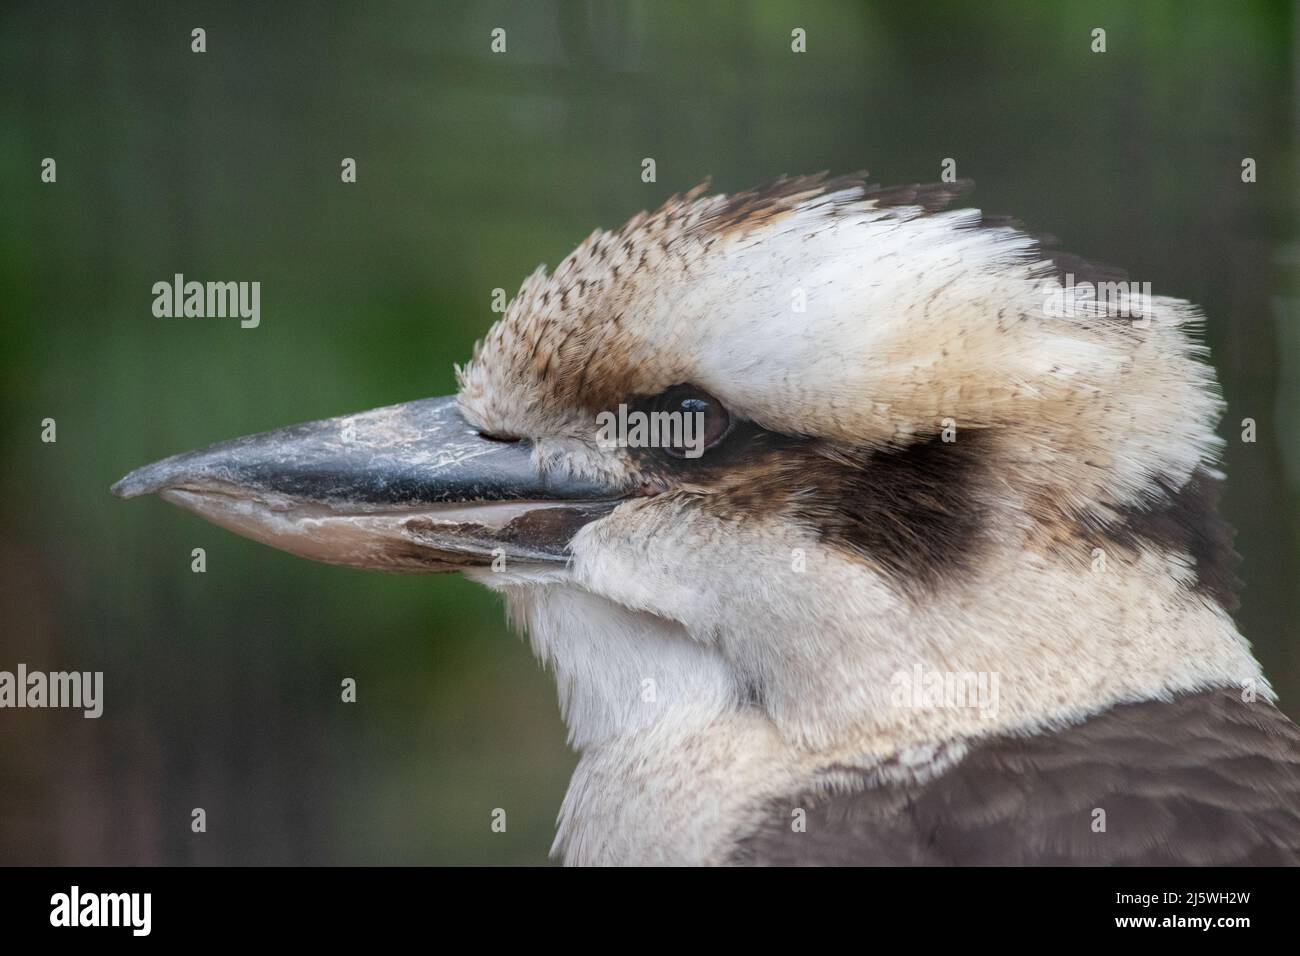 The laughing kookaburra (Dacelo novaeguineae) is a bird in the kingfisher subfamily Halcyoninae. It is a large robust kingfisher with a whitish head a Stock Photo